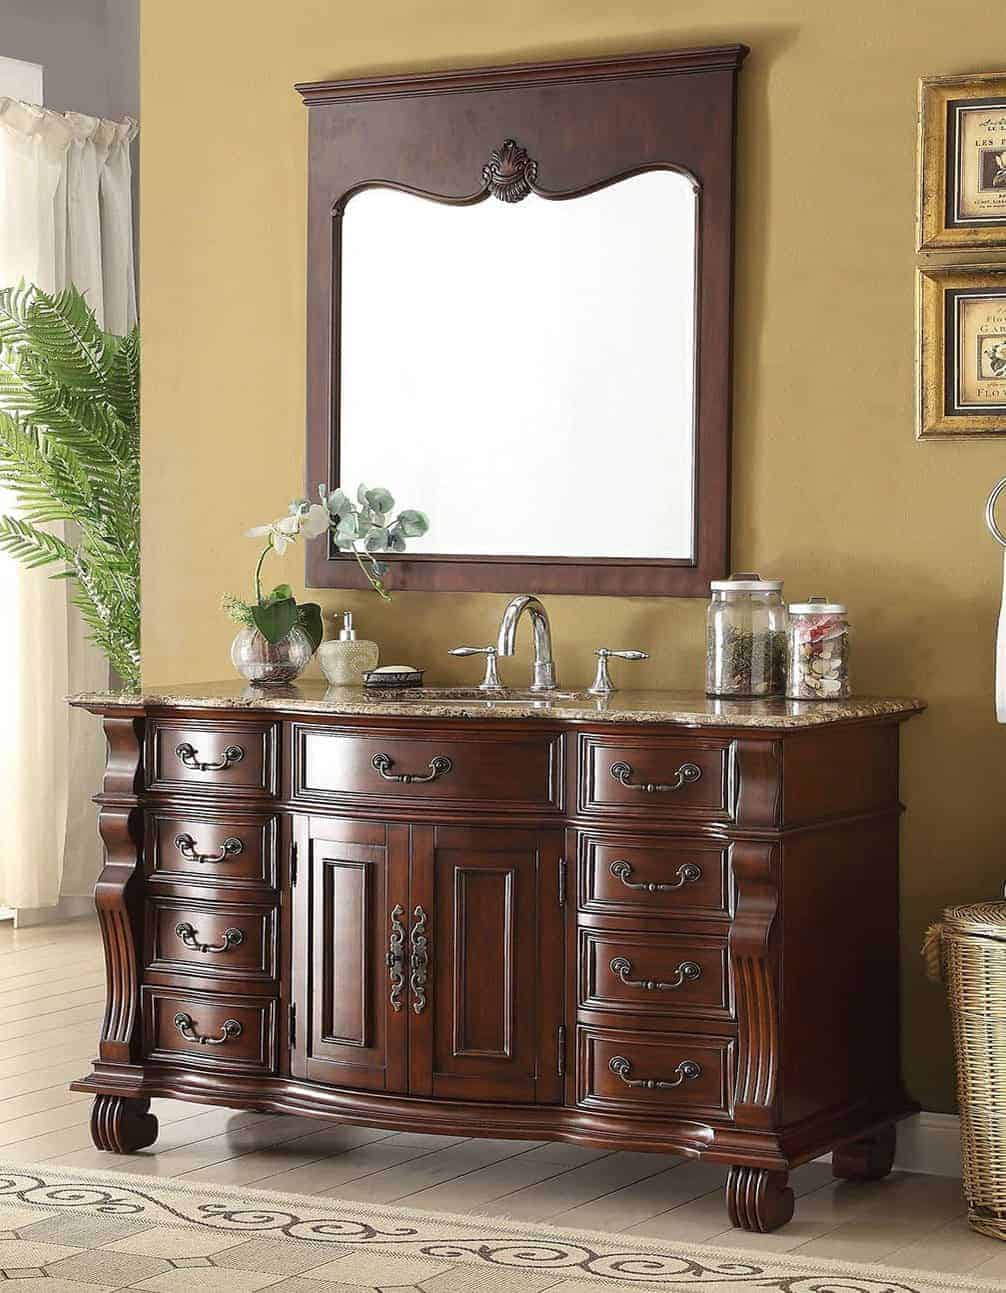 Traditional wood vintage vanity with detailing and mirror